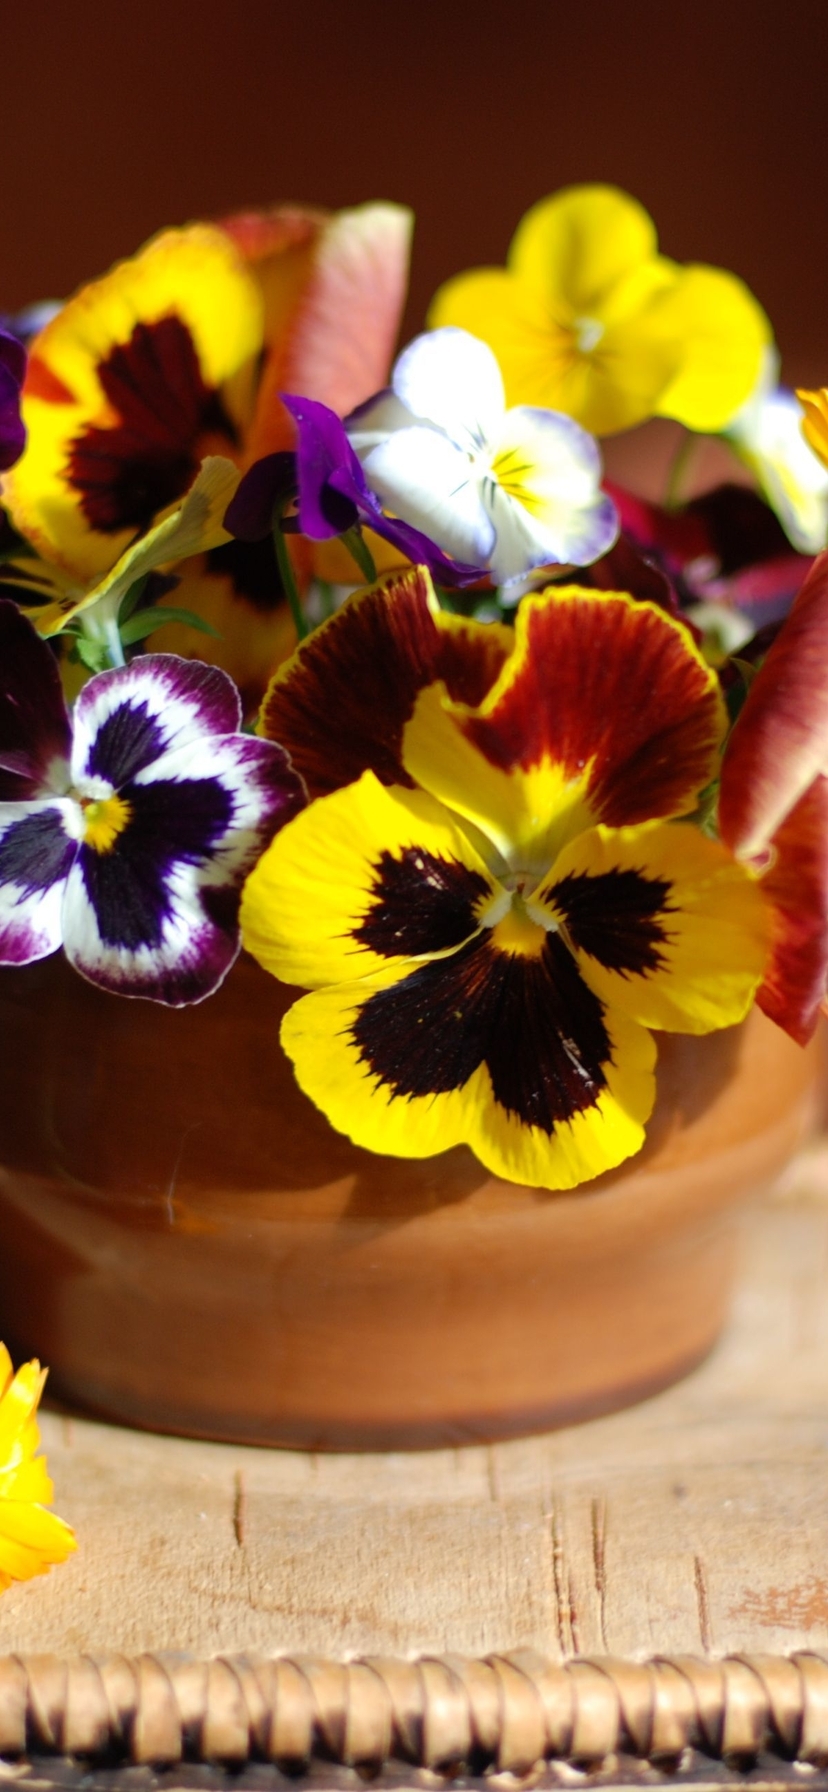 Image: Flowers, Pansy, violet